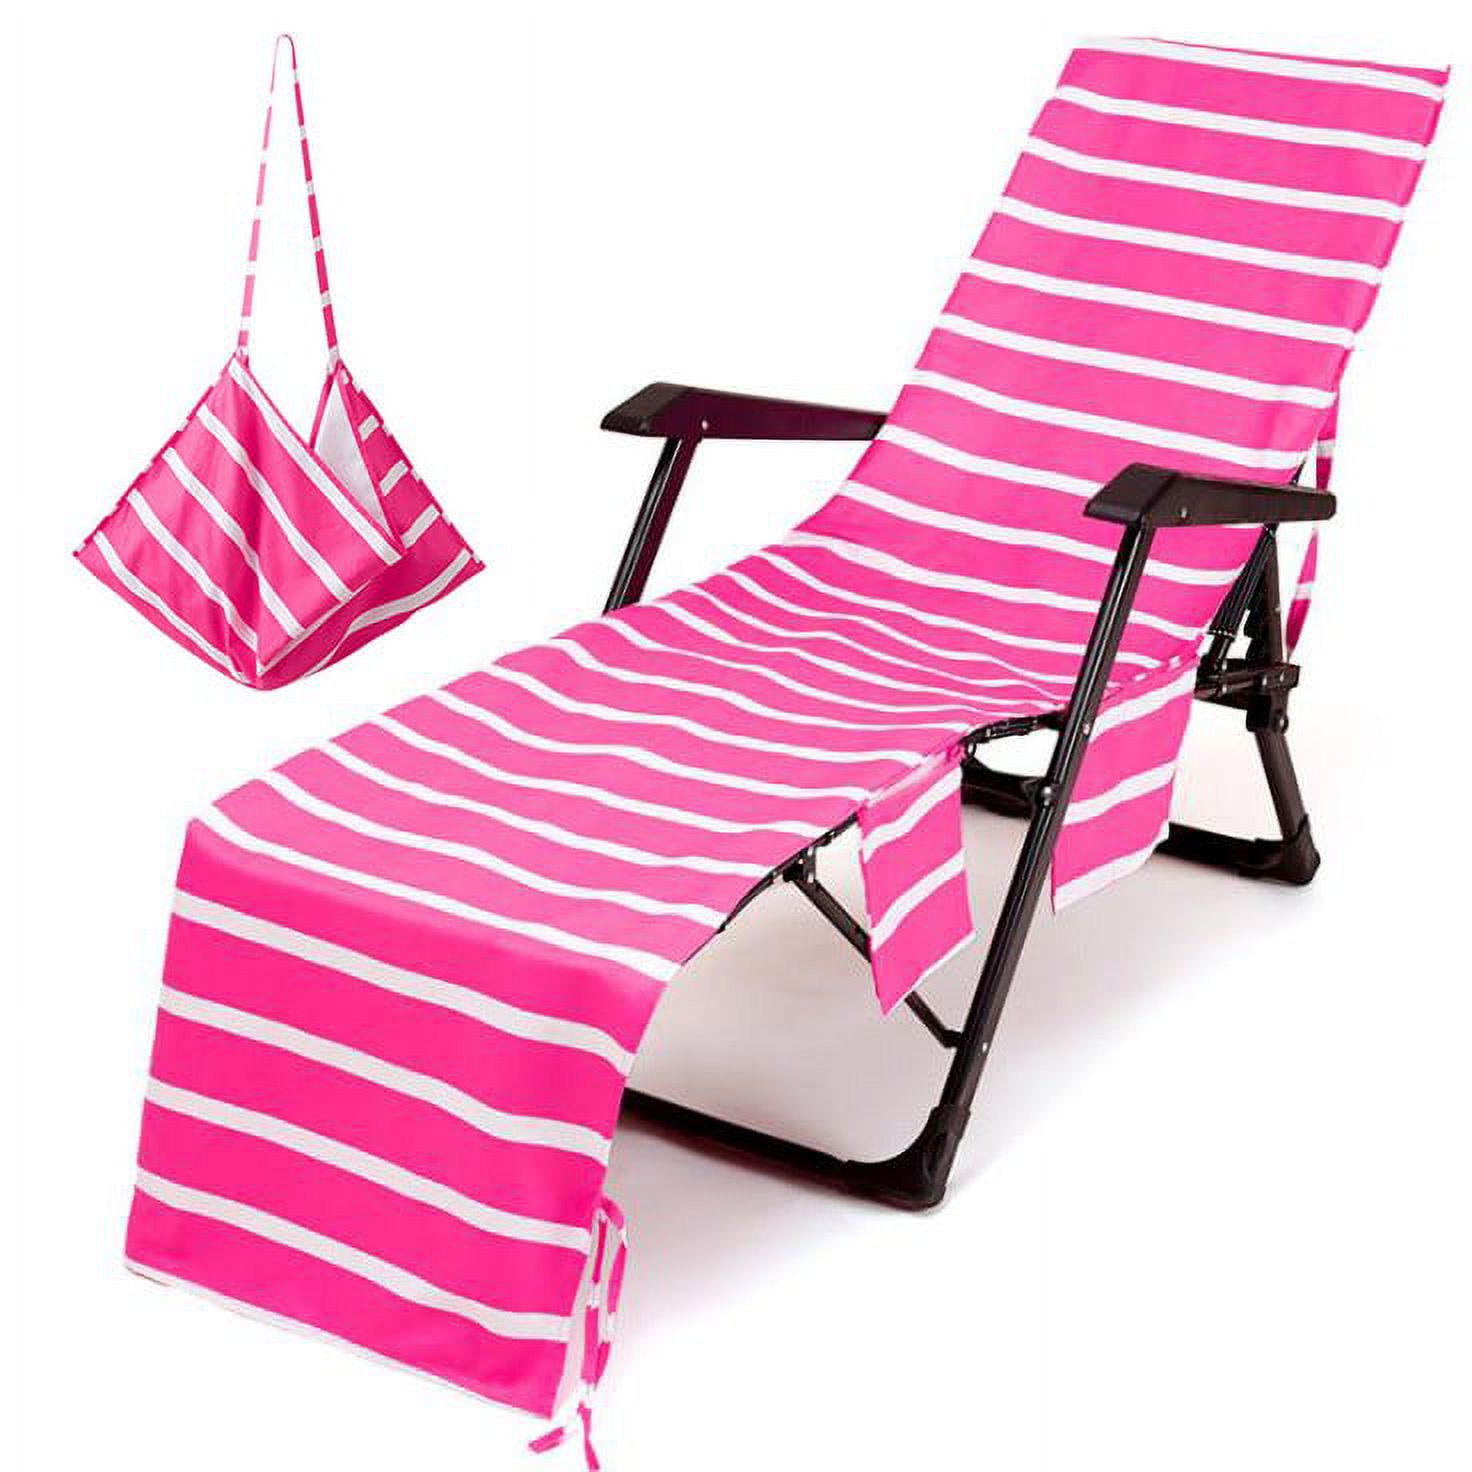 Dezsed Pool Lounge Chair Cover Clearance Stripe Chair Cover Printed Beach Towel Polyester Cotton Lounge Chair Towel Hot - image 3 of 4